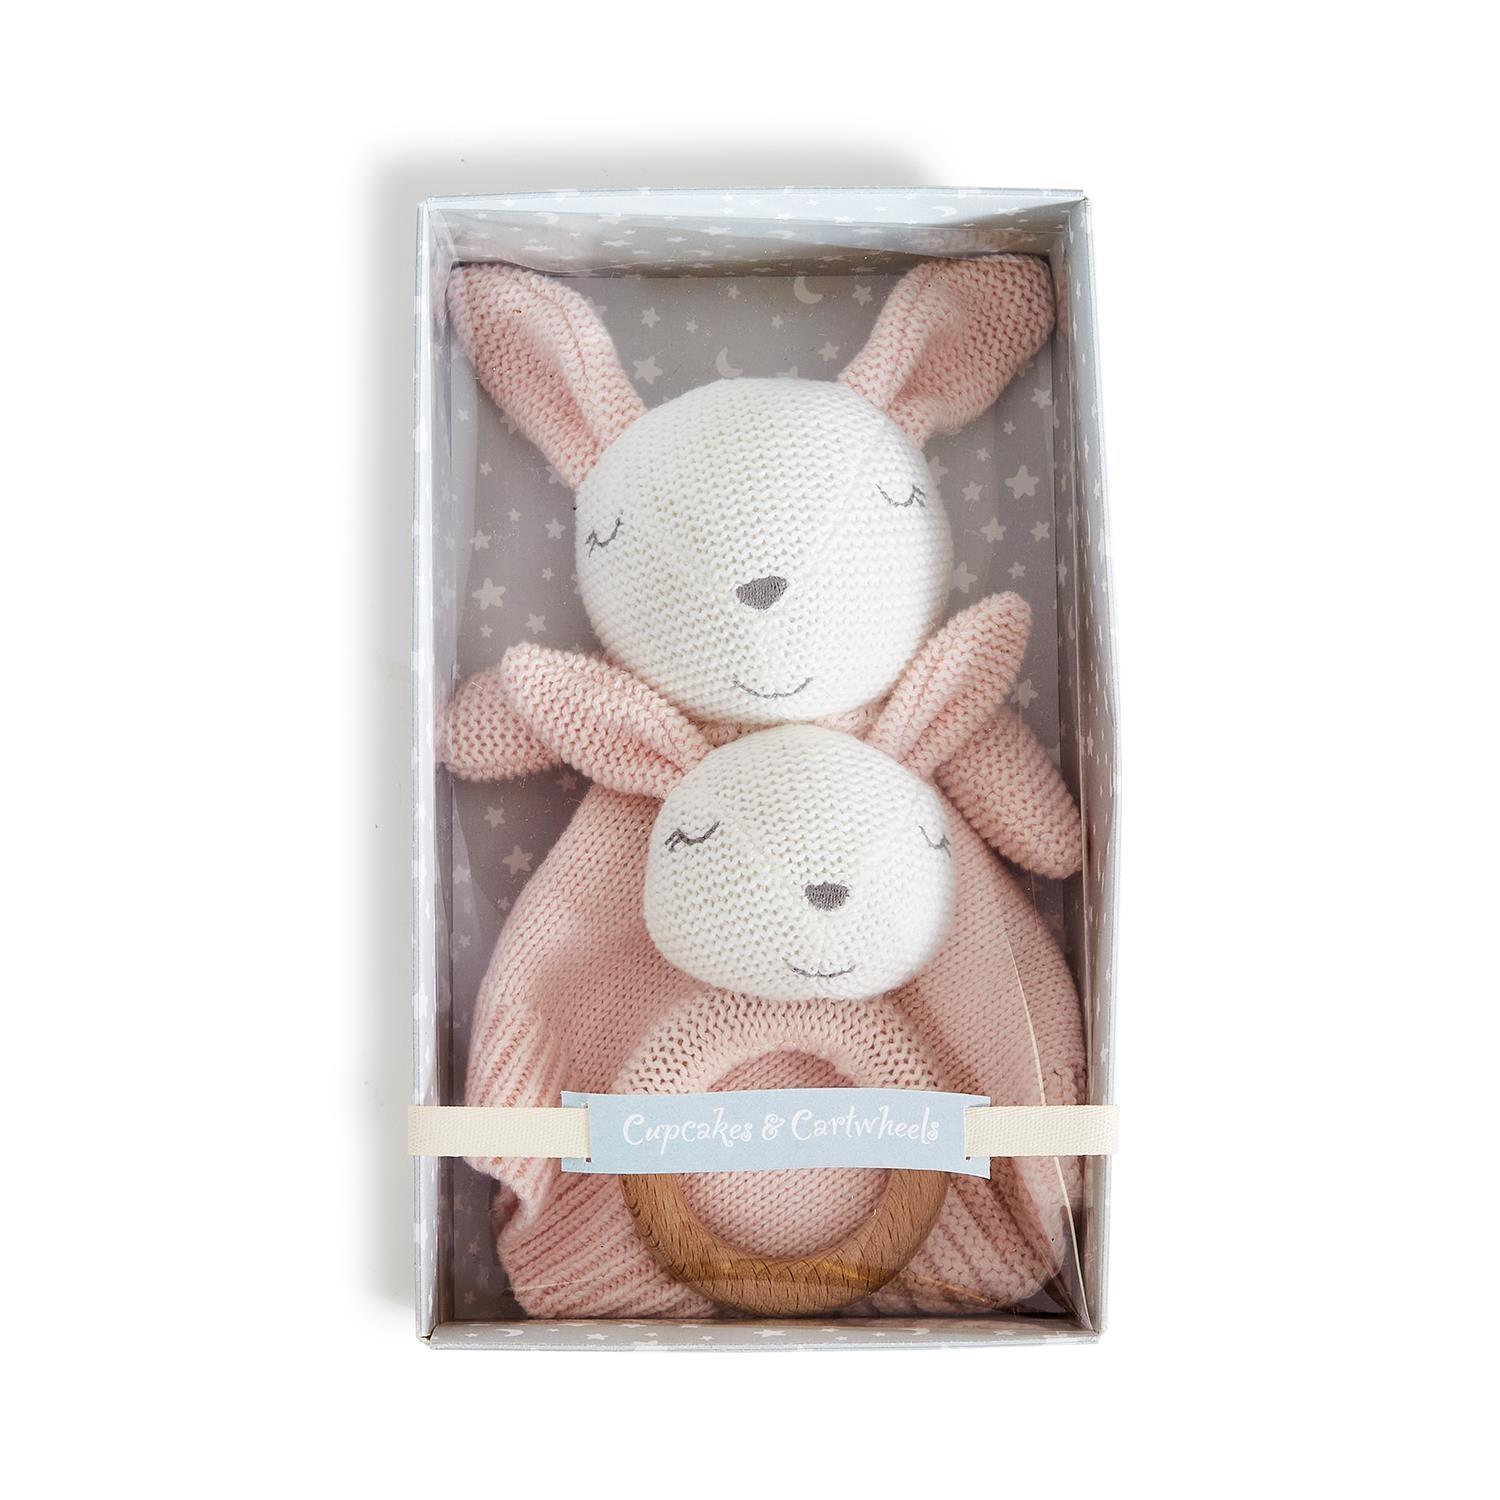 Knitted Baby Bunny Snuggle and Rattle Set - Elegant Linen